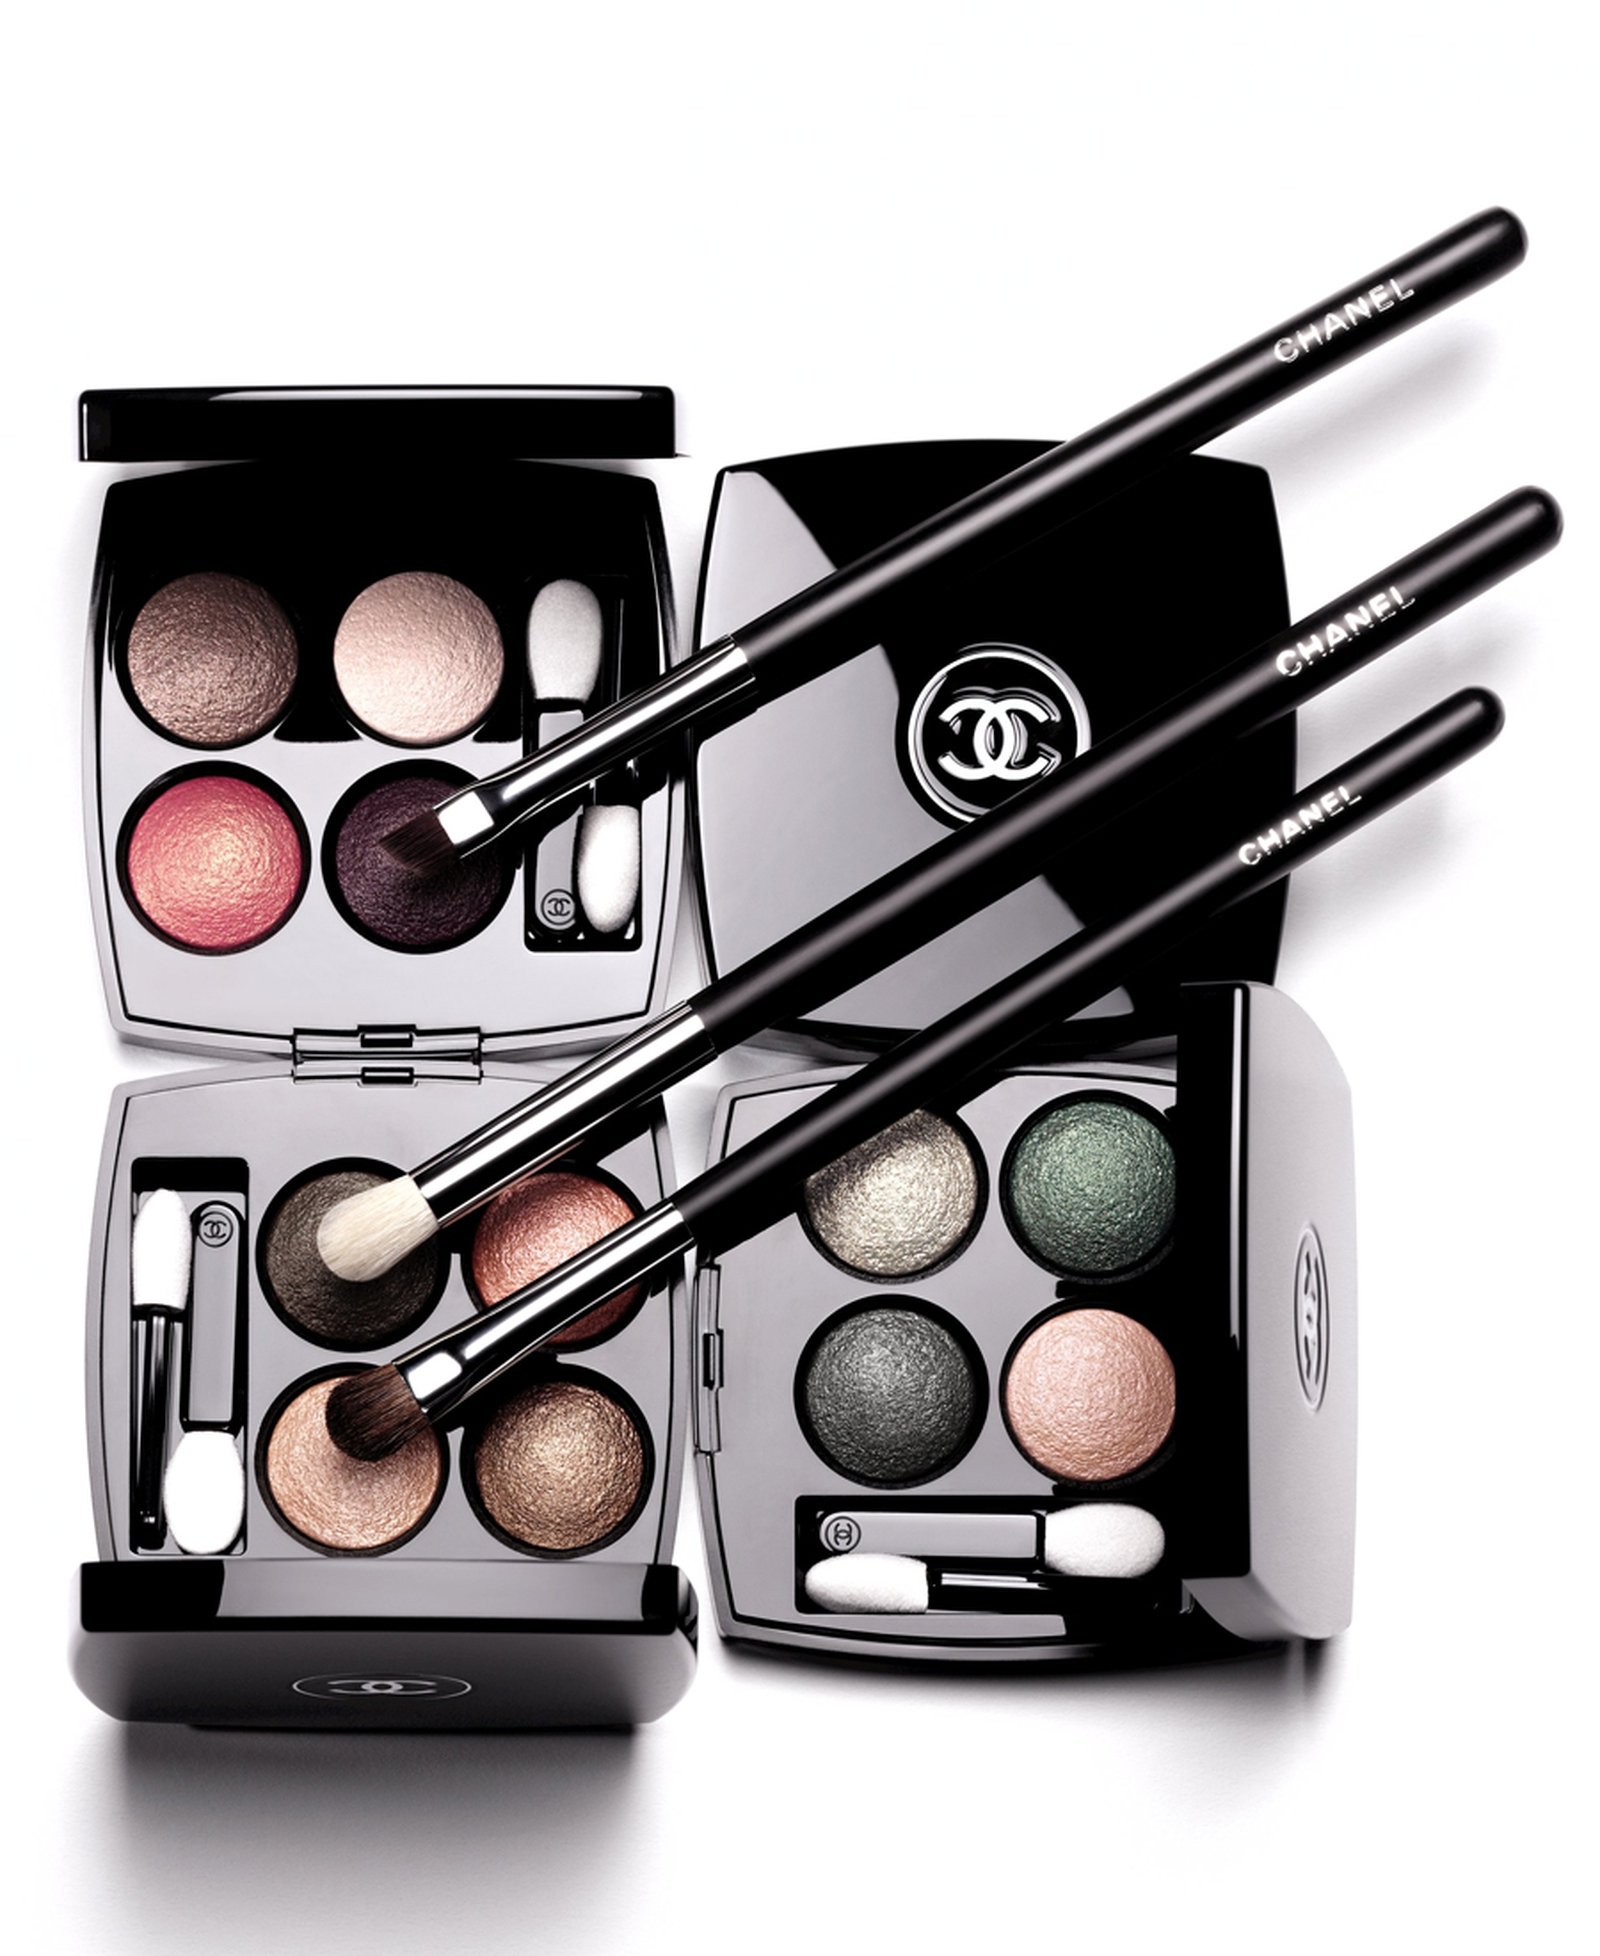 Chanel Les 4 Ombres Collection for Spring 2014, News